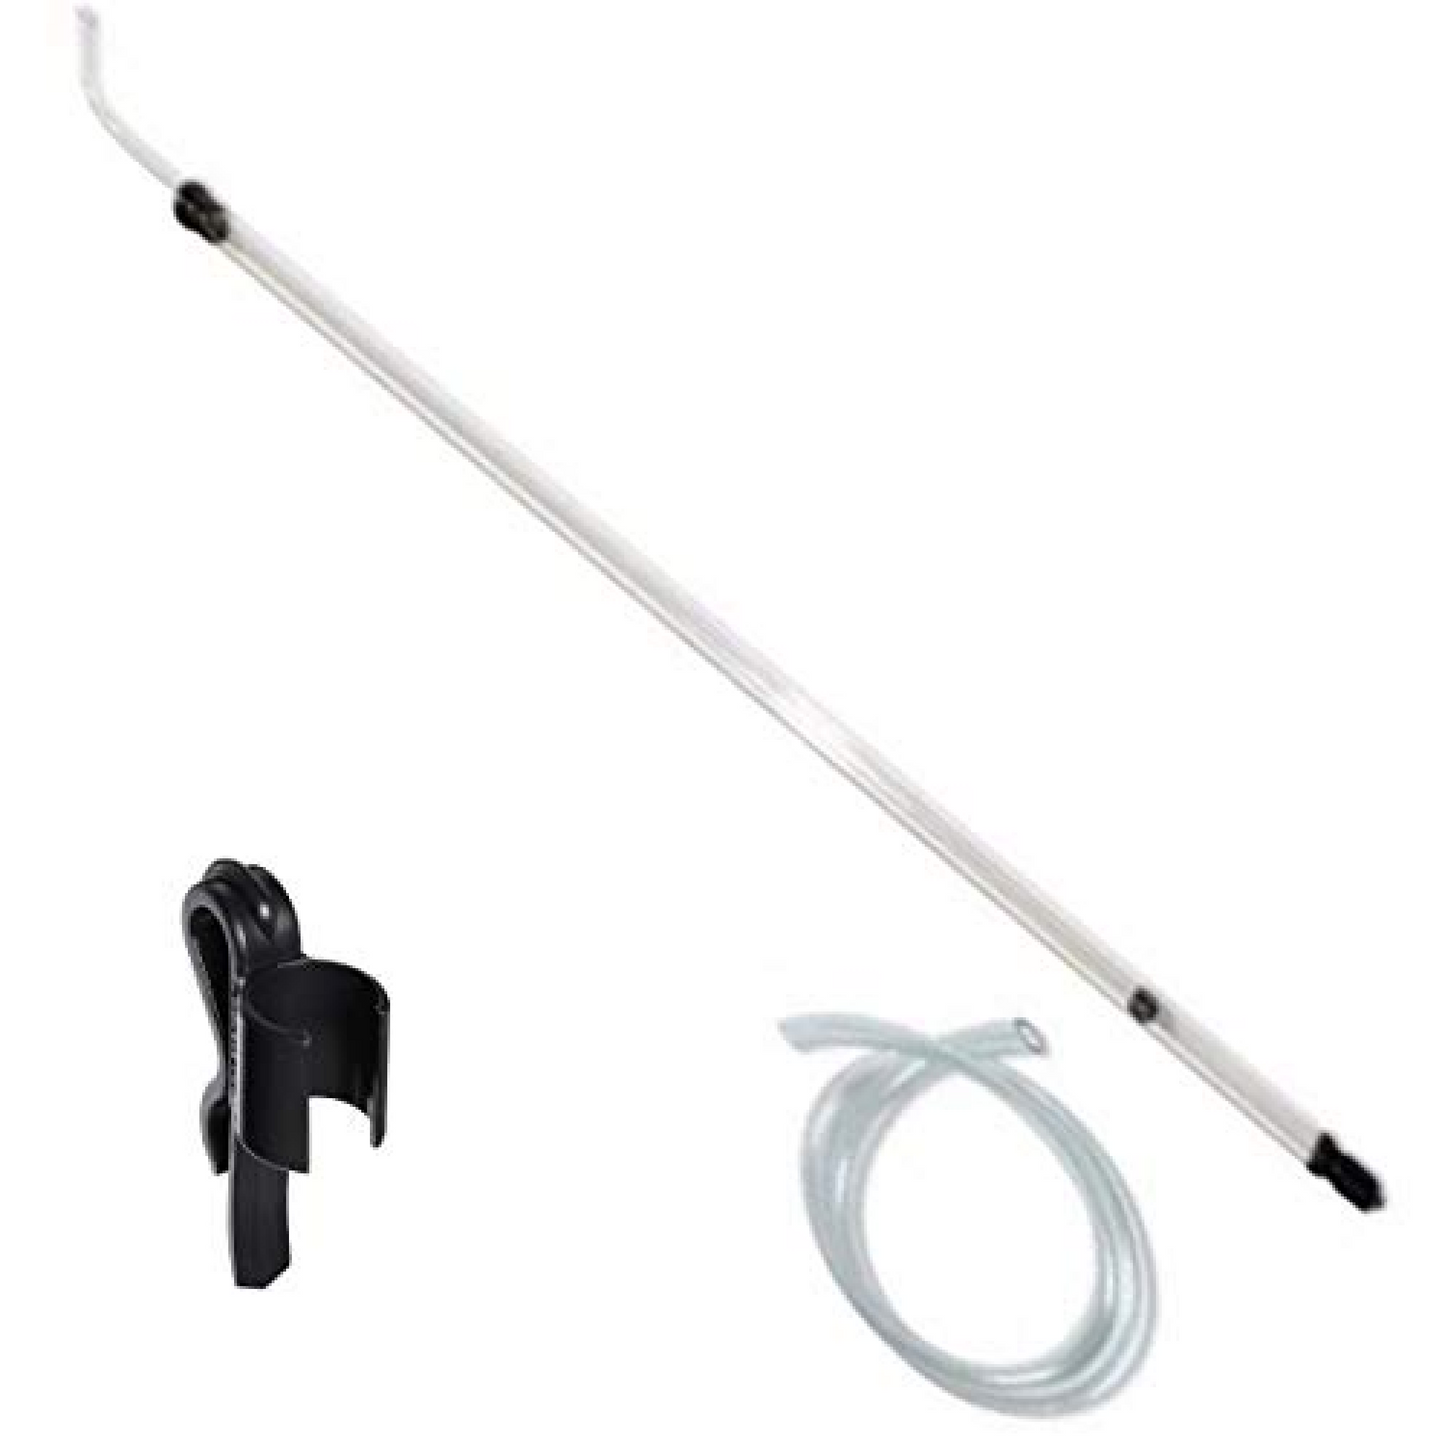 Auto-Siphon Regular with 6 Feet of 5/16" Tubing and Clamp